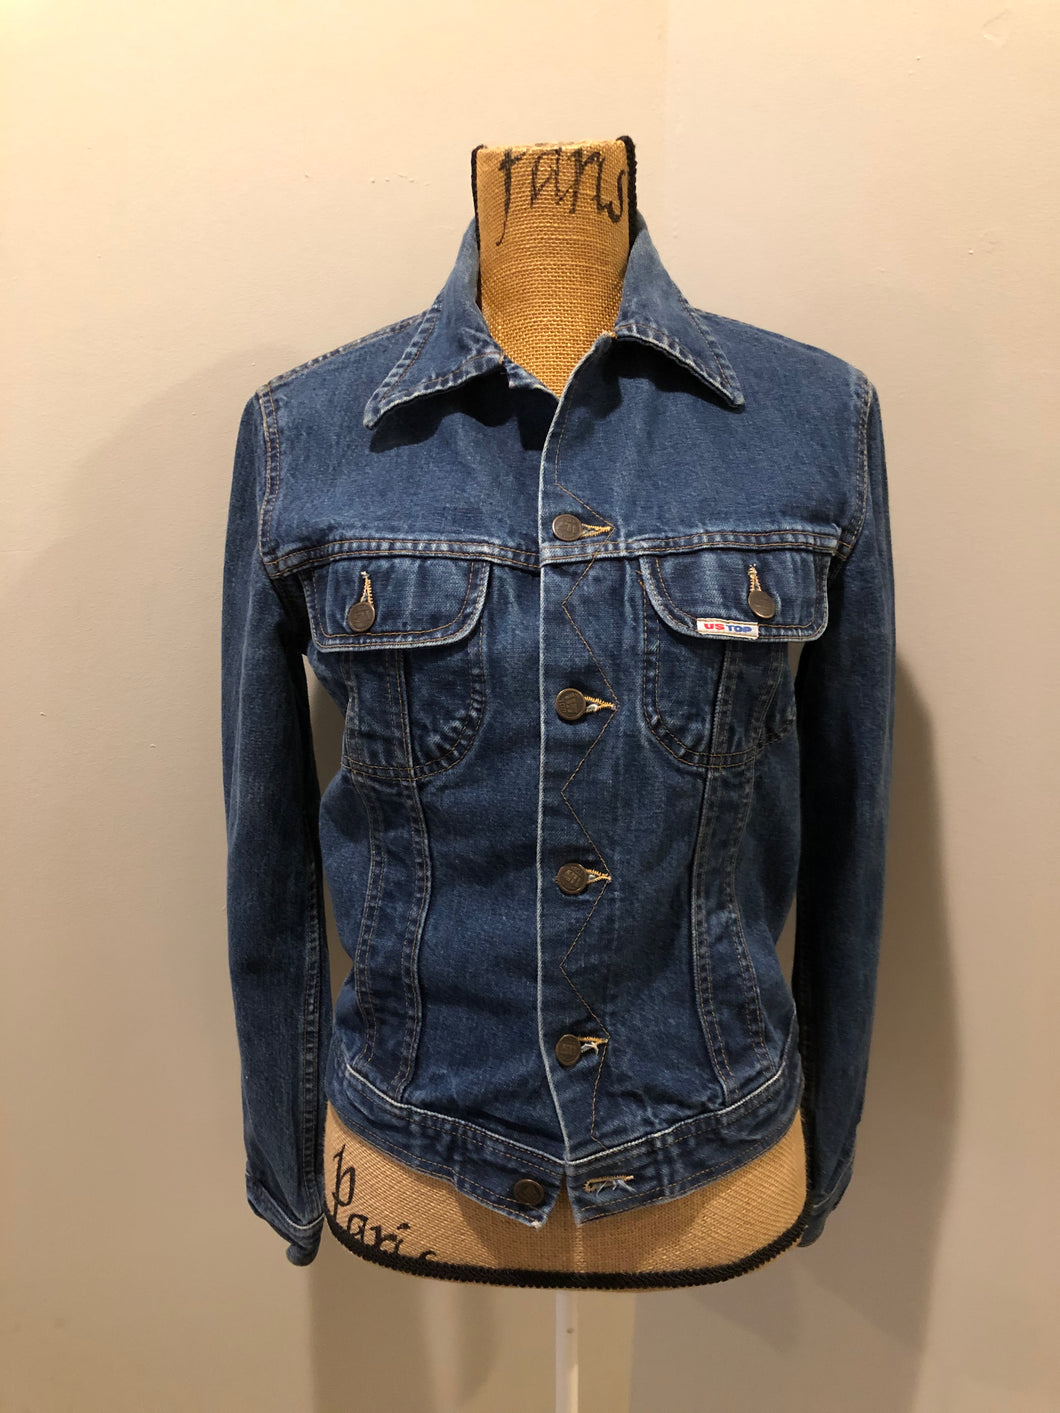 Kingspier Vintage - US Top denim jacket in a medium wash with button closures, two flap pockets on the chest, gold stitching with a unique stitch design down the center front. 